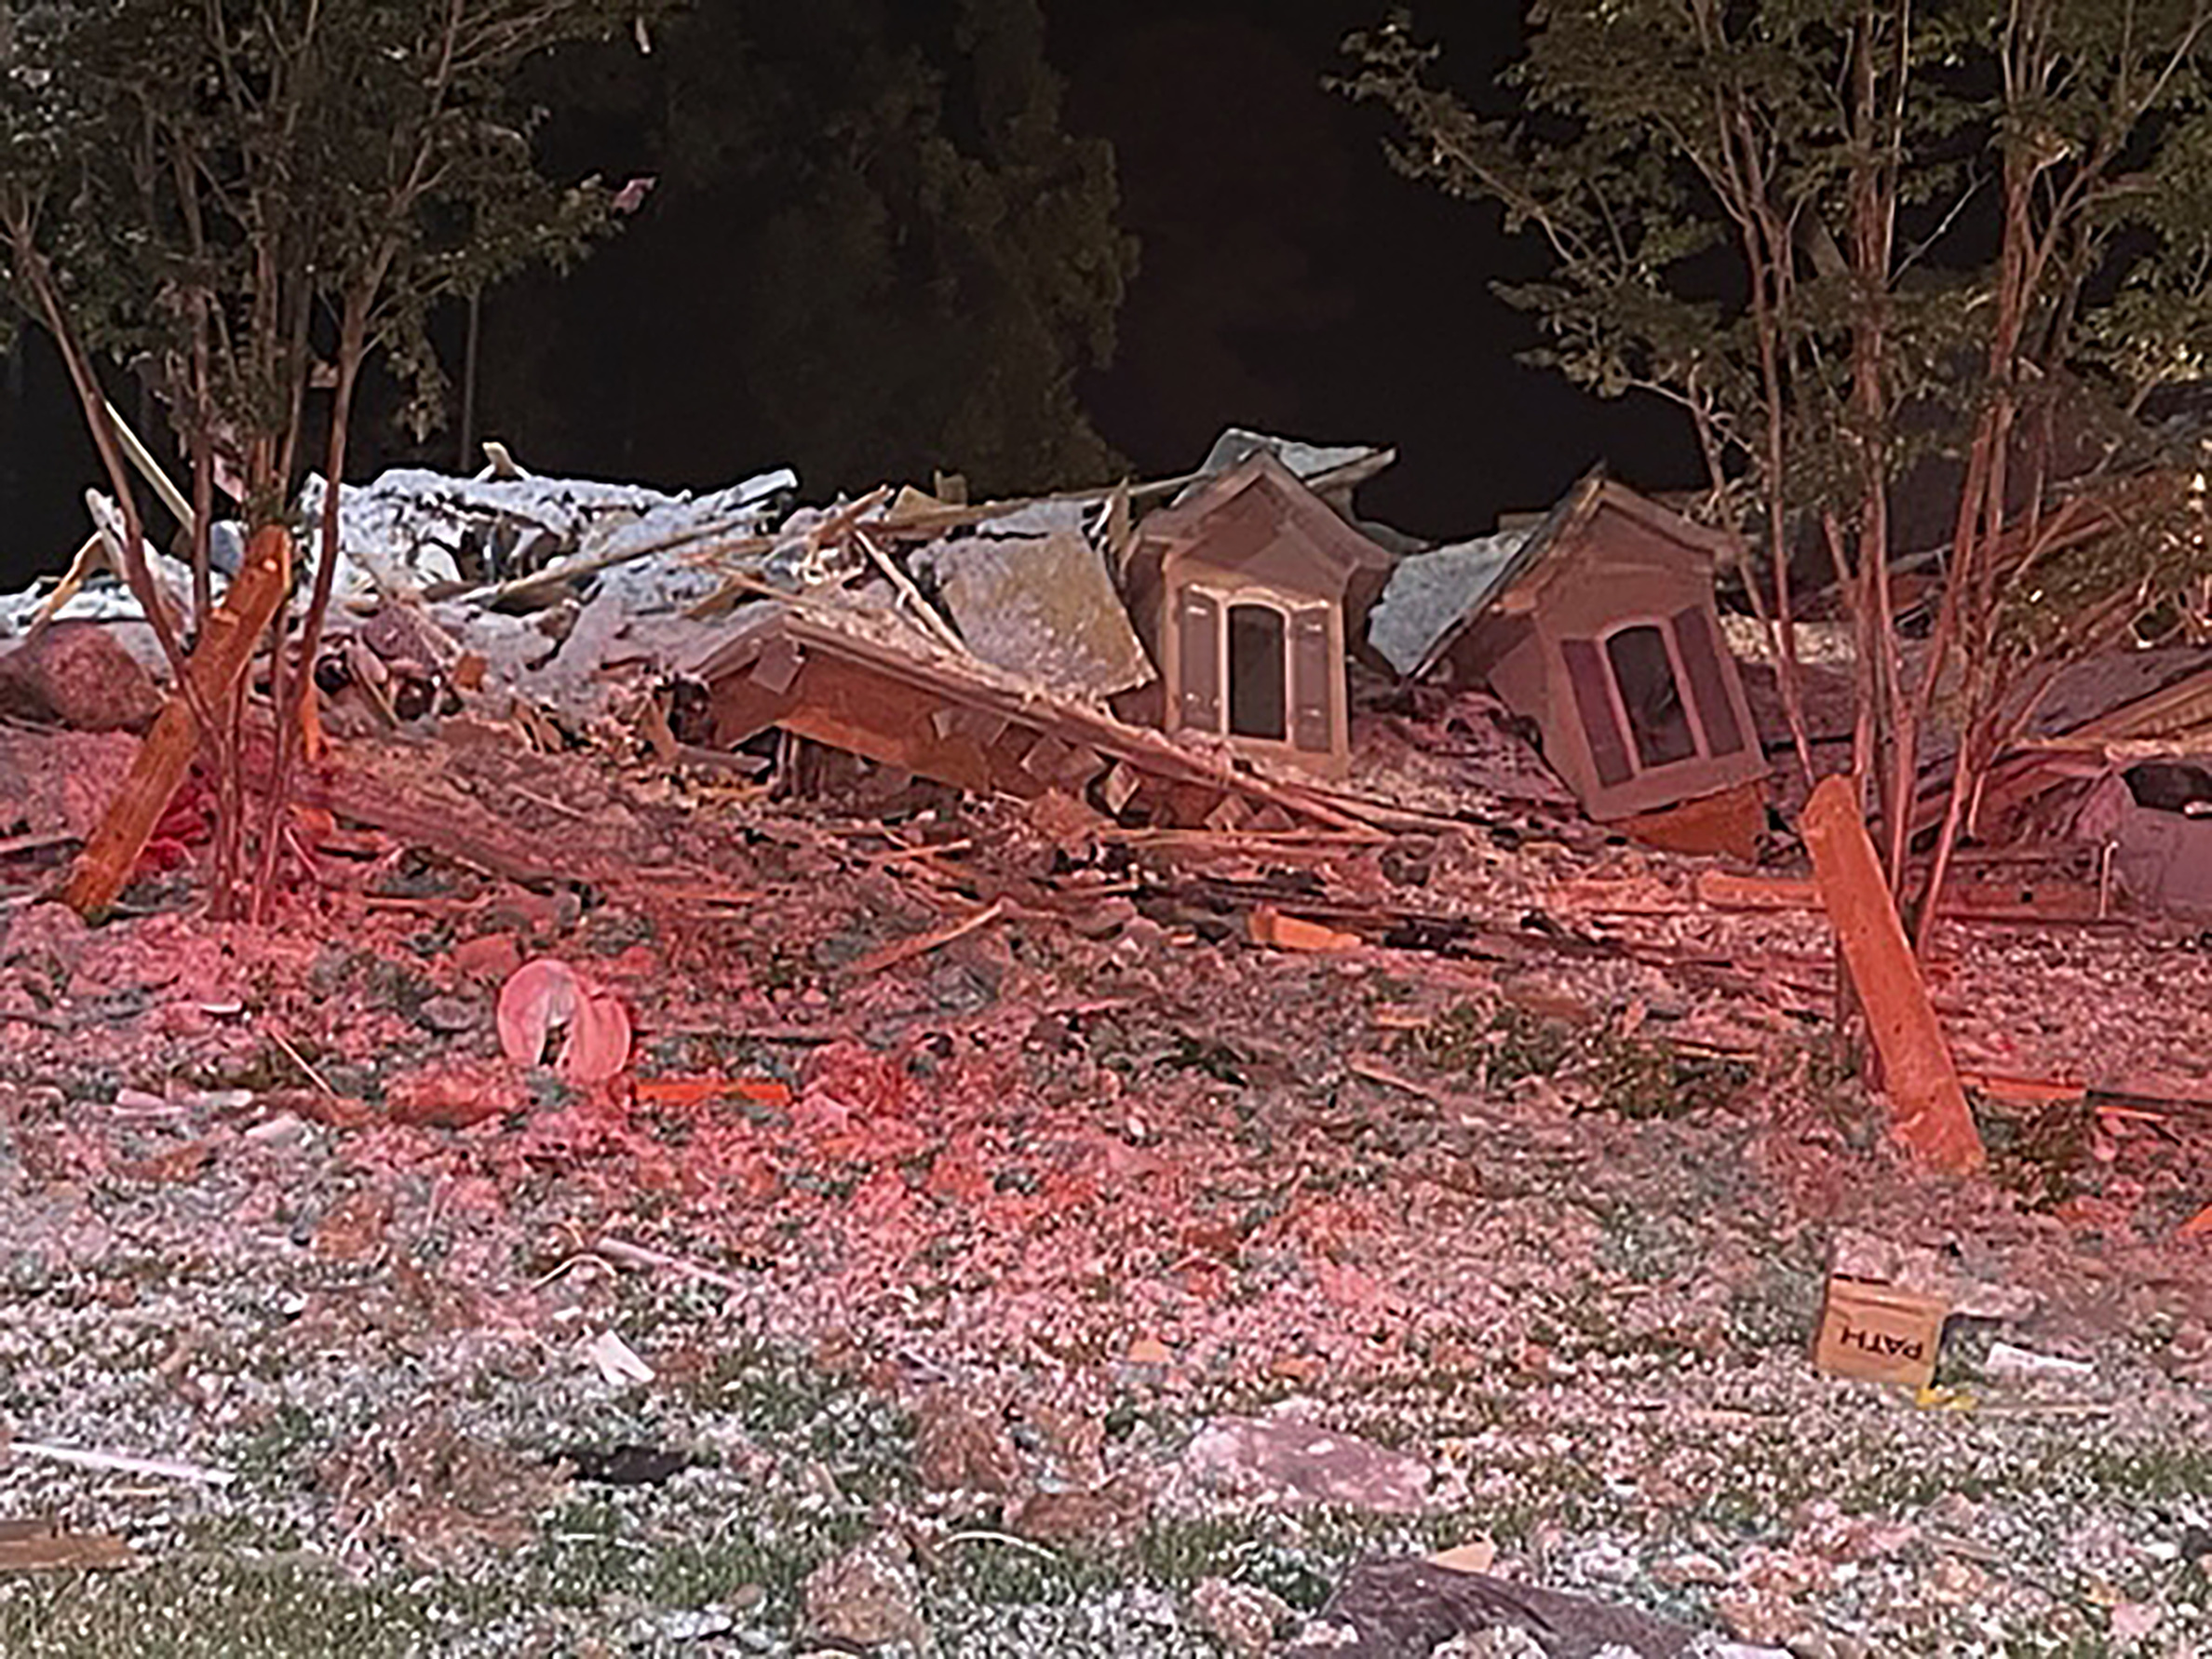 This photo taken early Tuesday morning in Mooresville, North Carolina, shows the rubble of a home that collapsed. Iredell County Emergency Management said in a Tuesday news release that emergency officials responded to the home after a reported explosion and collapse and that one person was injured and another person was found dead in the debris.